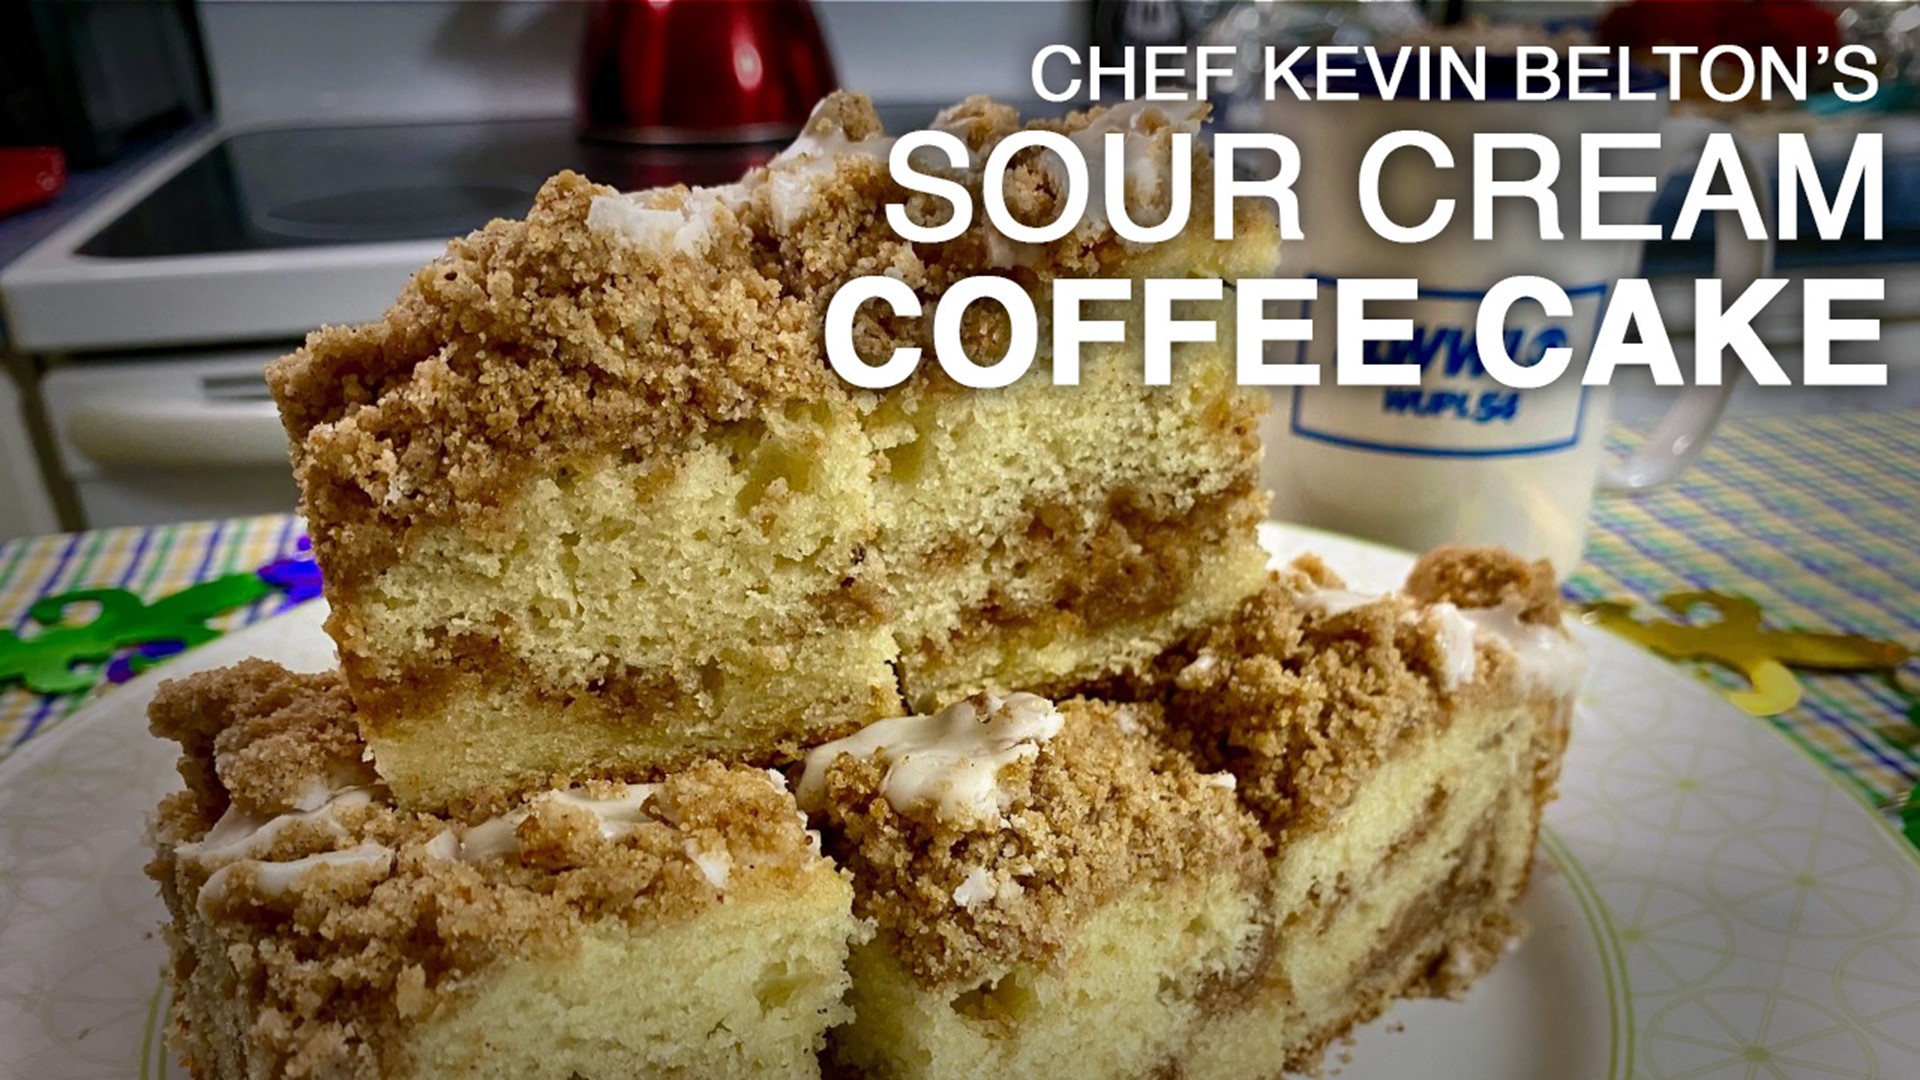 Sour cream keeps coffee cake nice and moist and adds a little tartness to that sweetness!